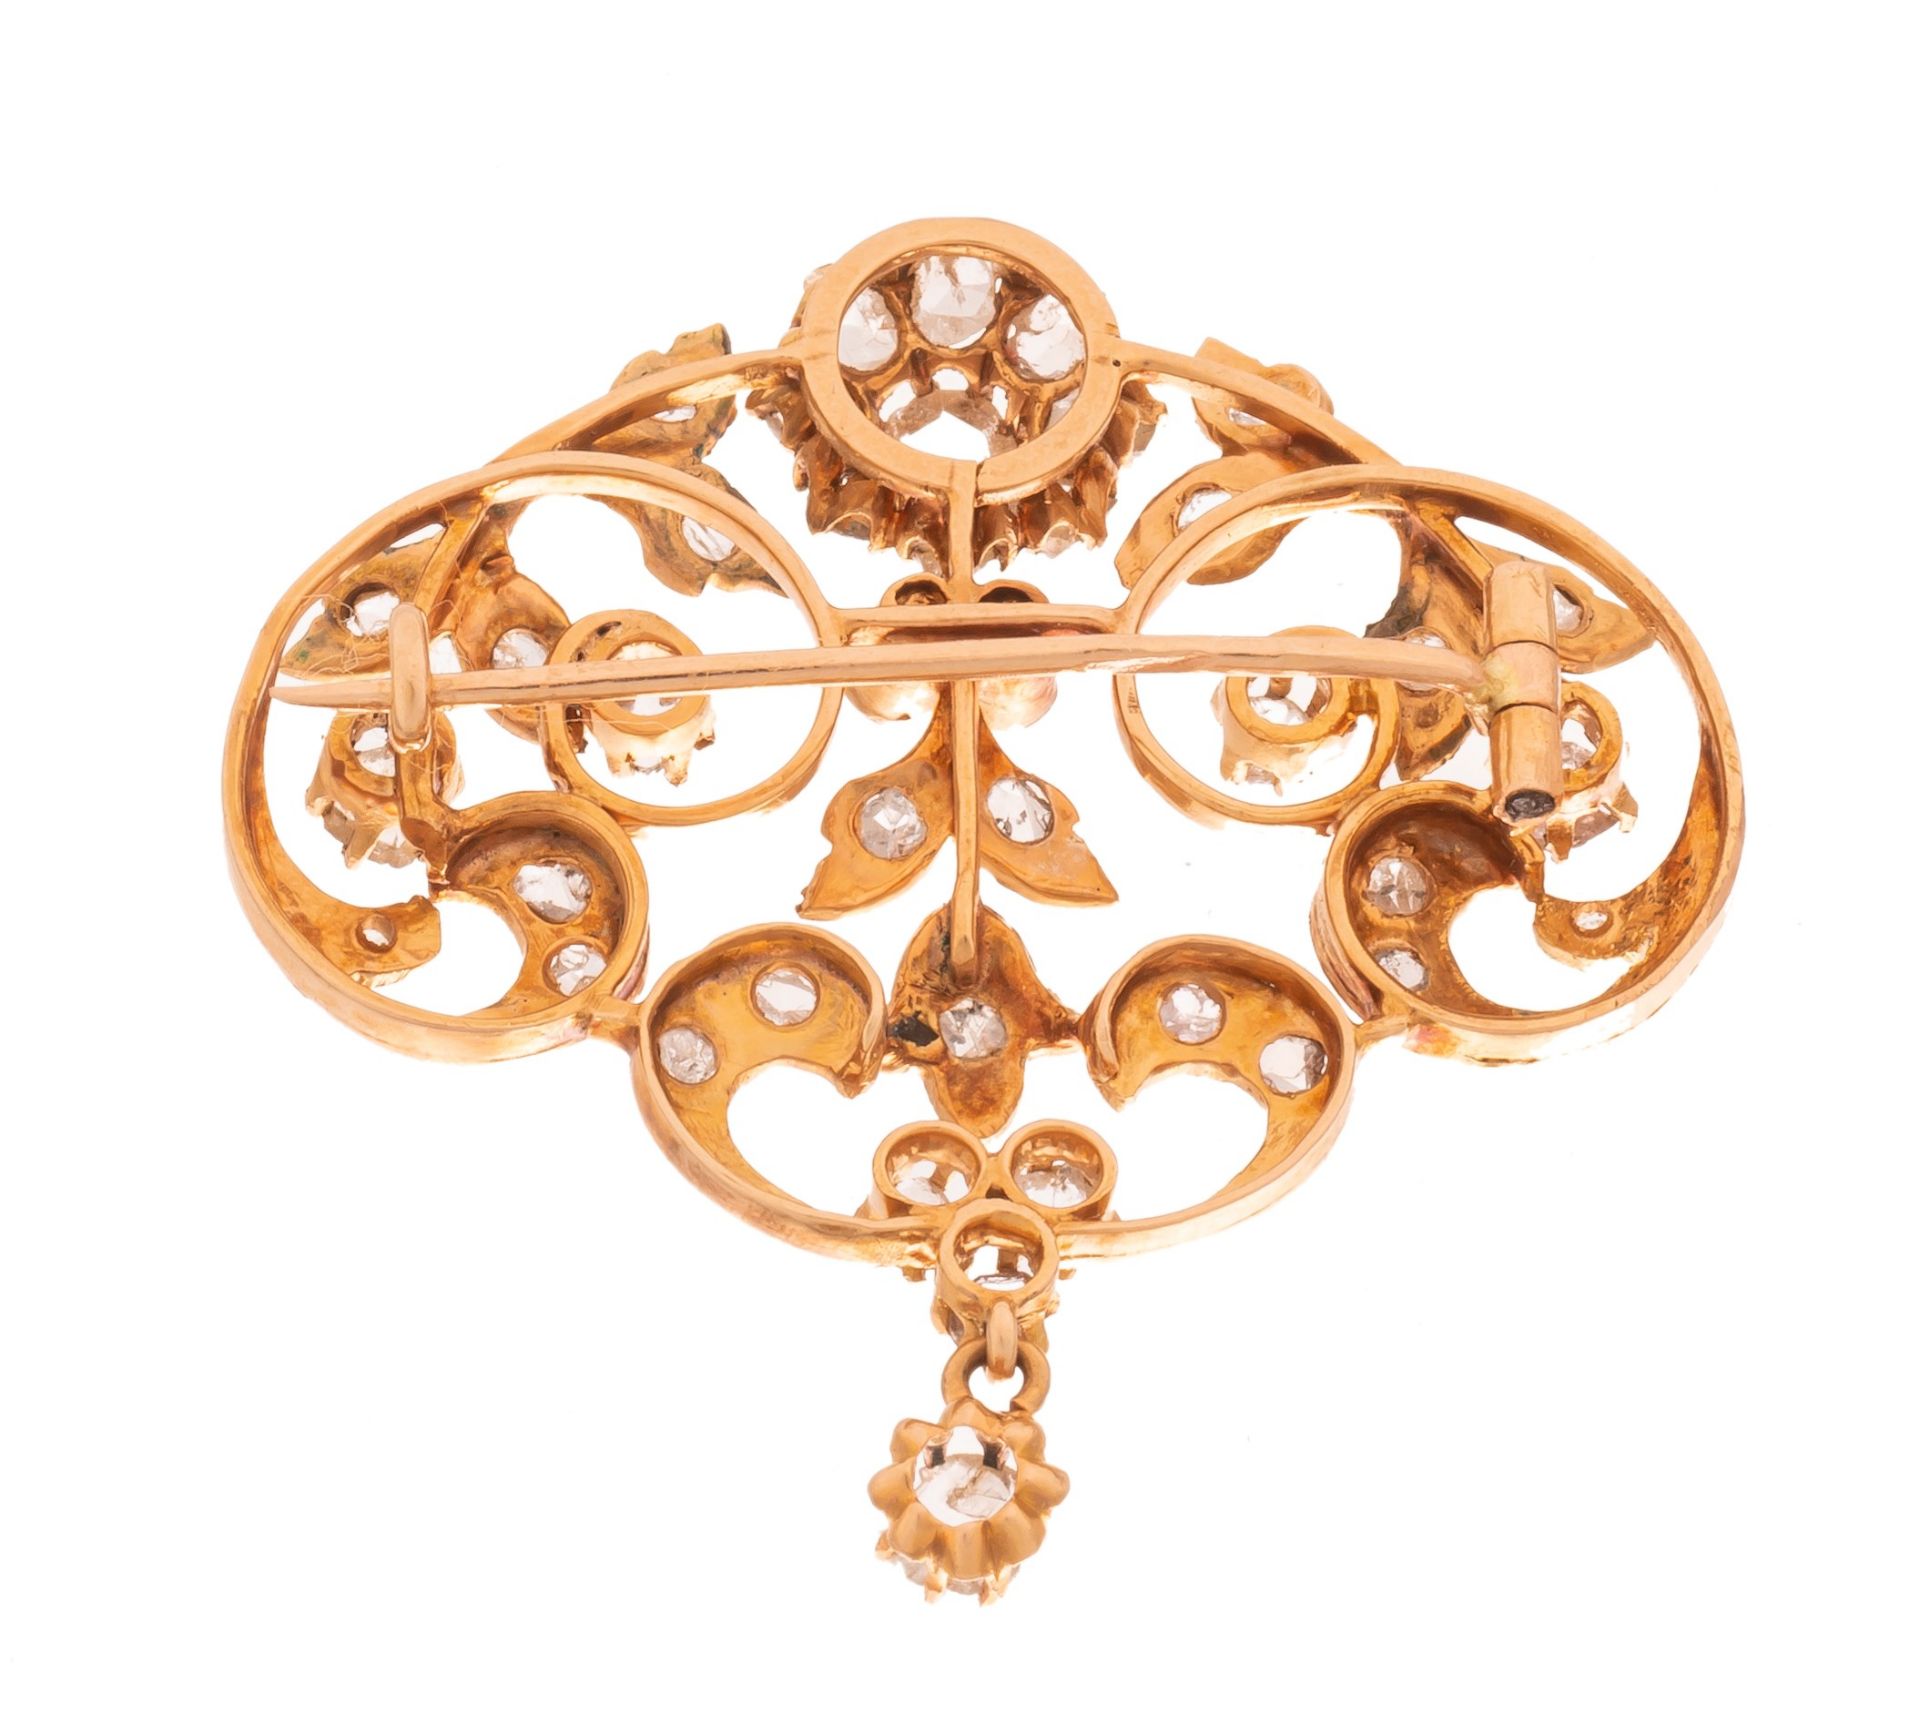 A Belle Epoque brooch in 18ct yellow gold, with rose-cut diamonds, H 4,2 cm - 8 g - Image 2 of 2